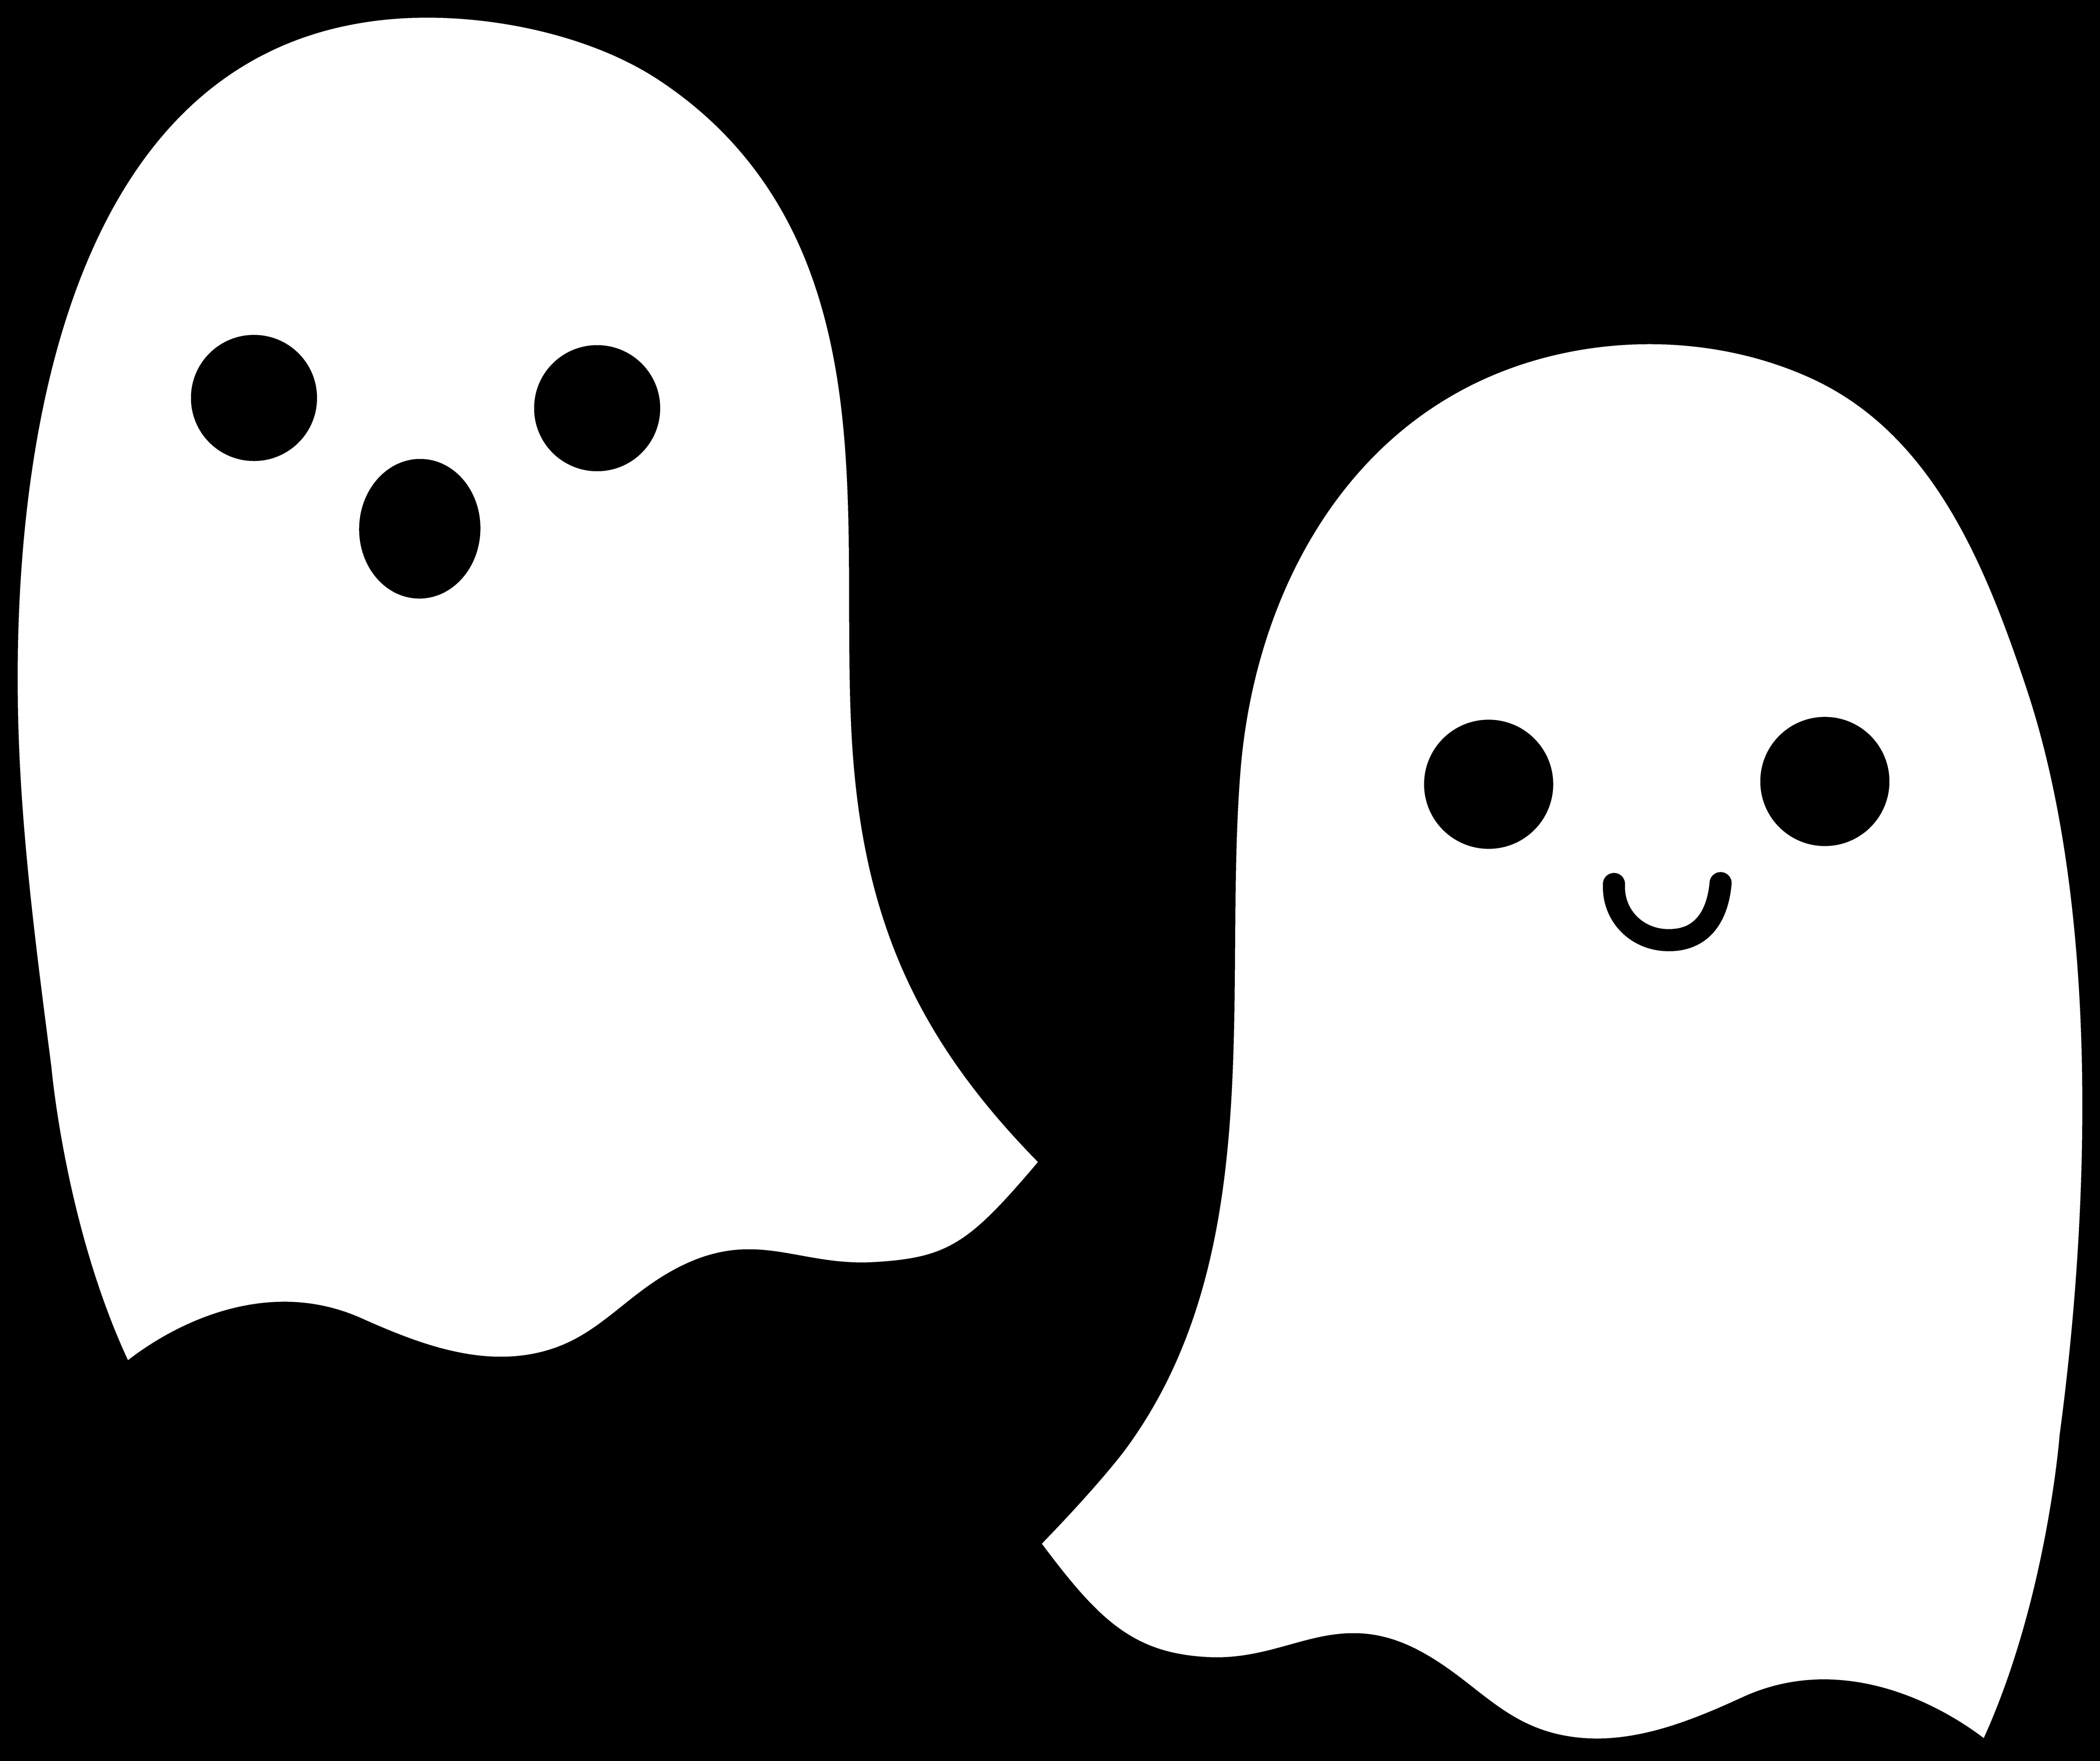 Cute Free Clip Art and Coloring Pages  Halloween ghosts, Cute  - FREE Printables - Cute Ghost Outline